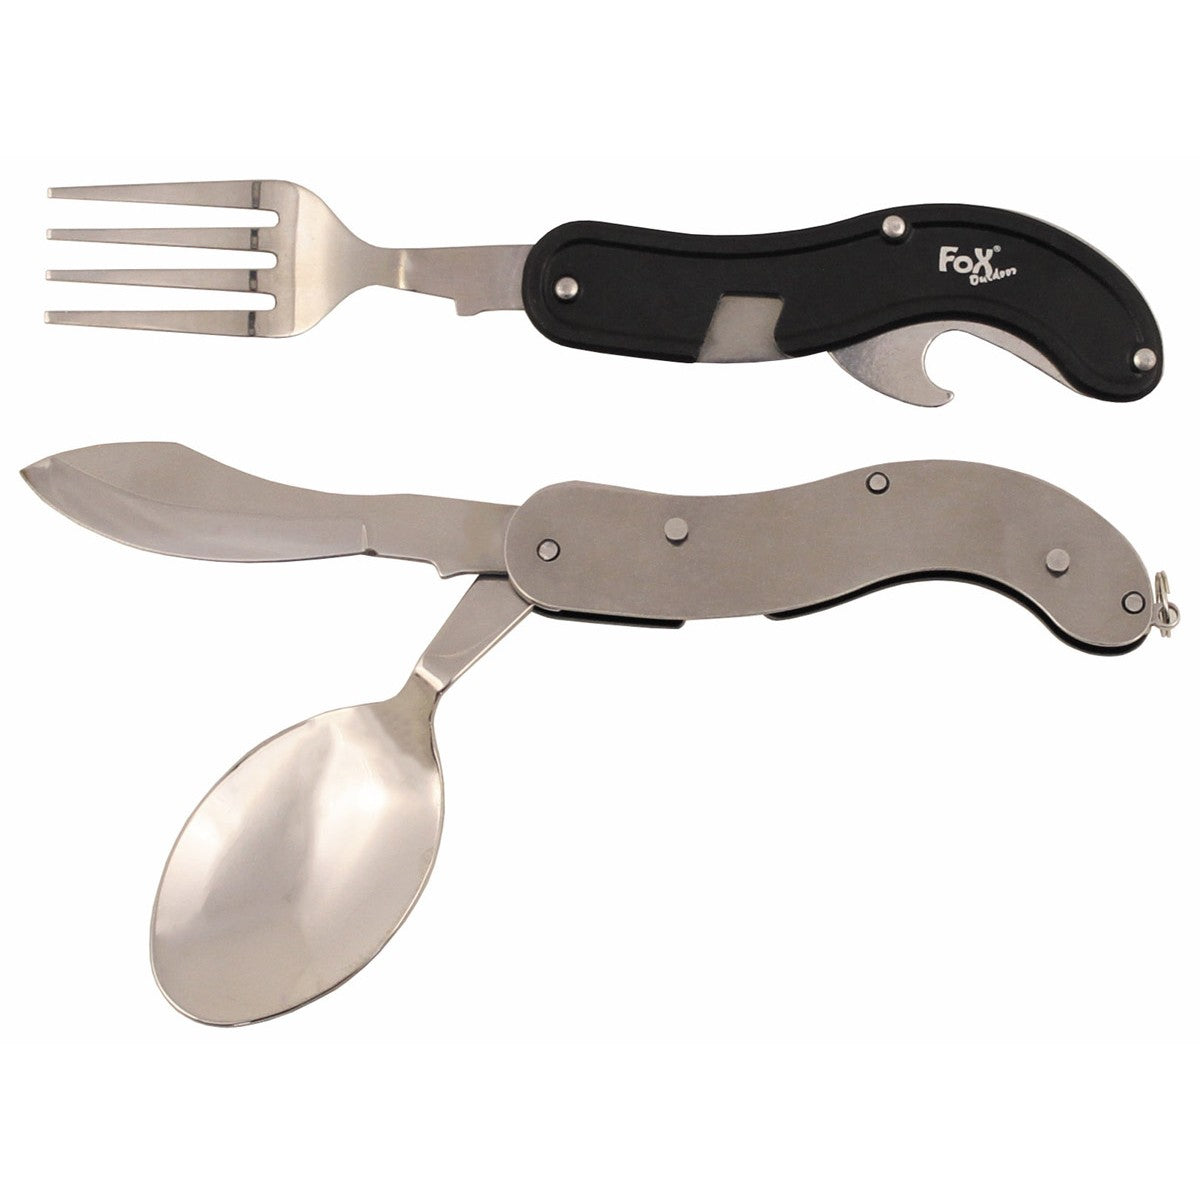 Premium cooking set with cutlery set - pot, pan, bowls, spoons with 4 in 1 pocket knife cutlery